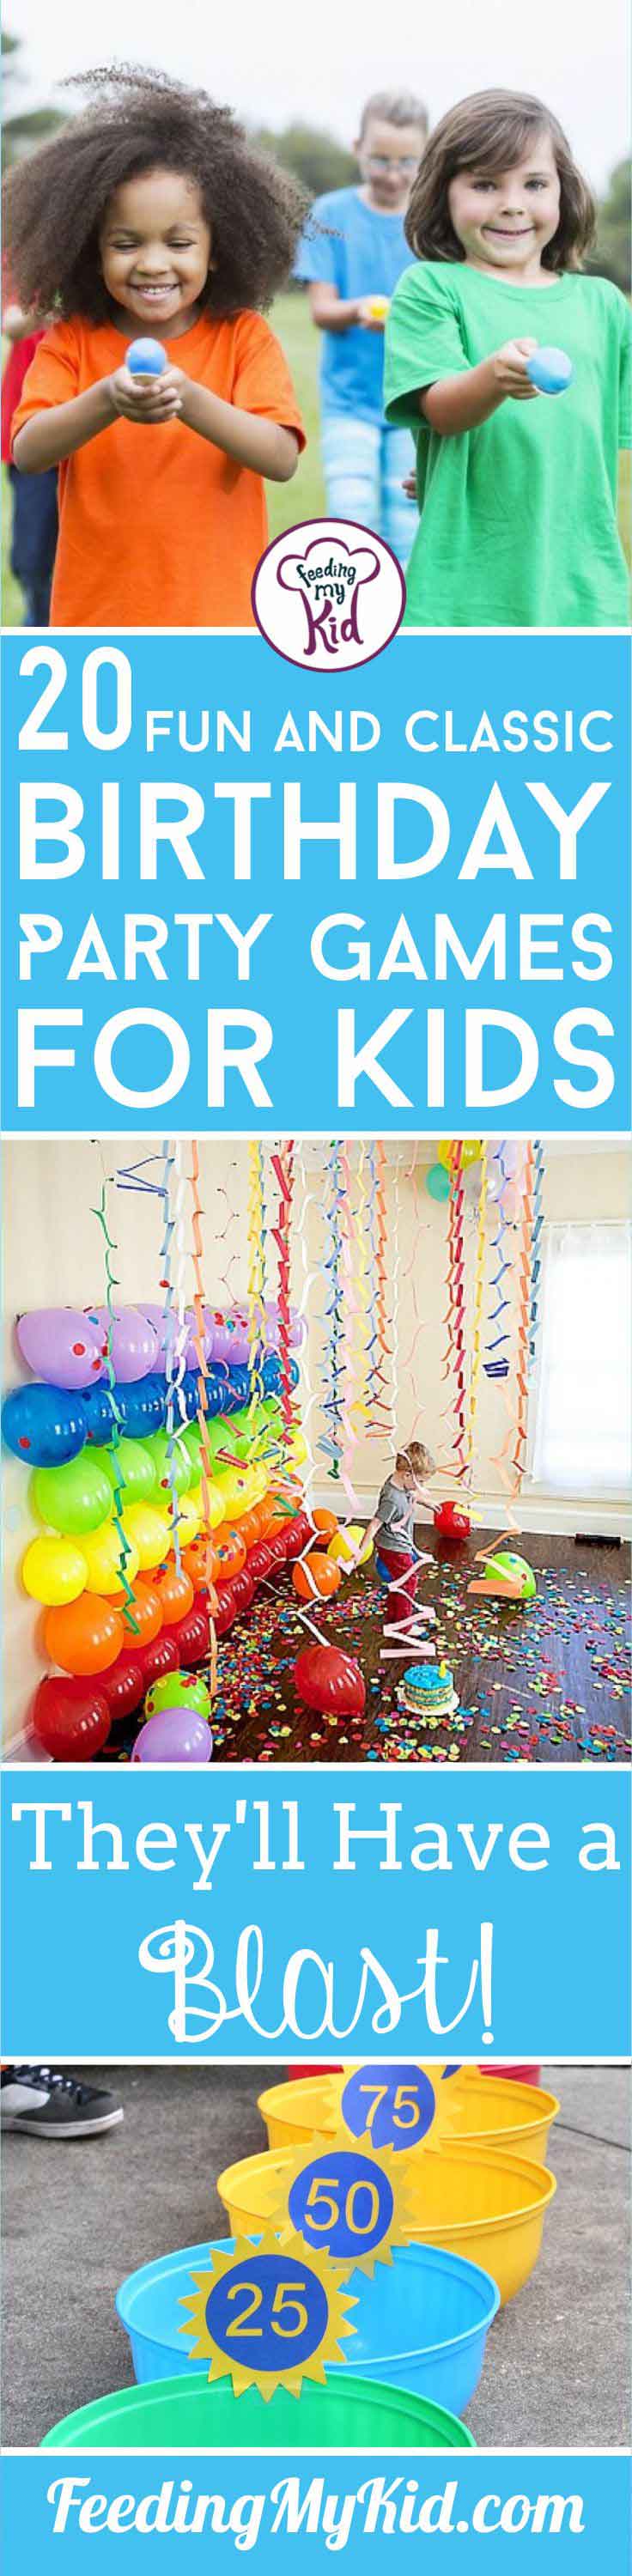 It can be stressful throwing a party for a bunch of kids. With these birthday party games, they won't be bored and you'll keep your sanity!